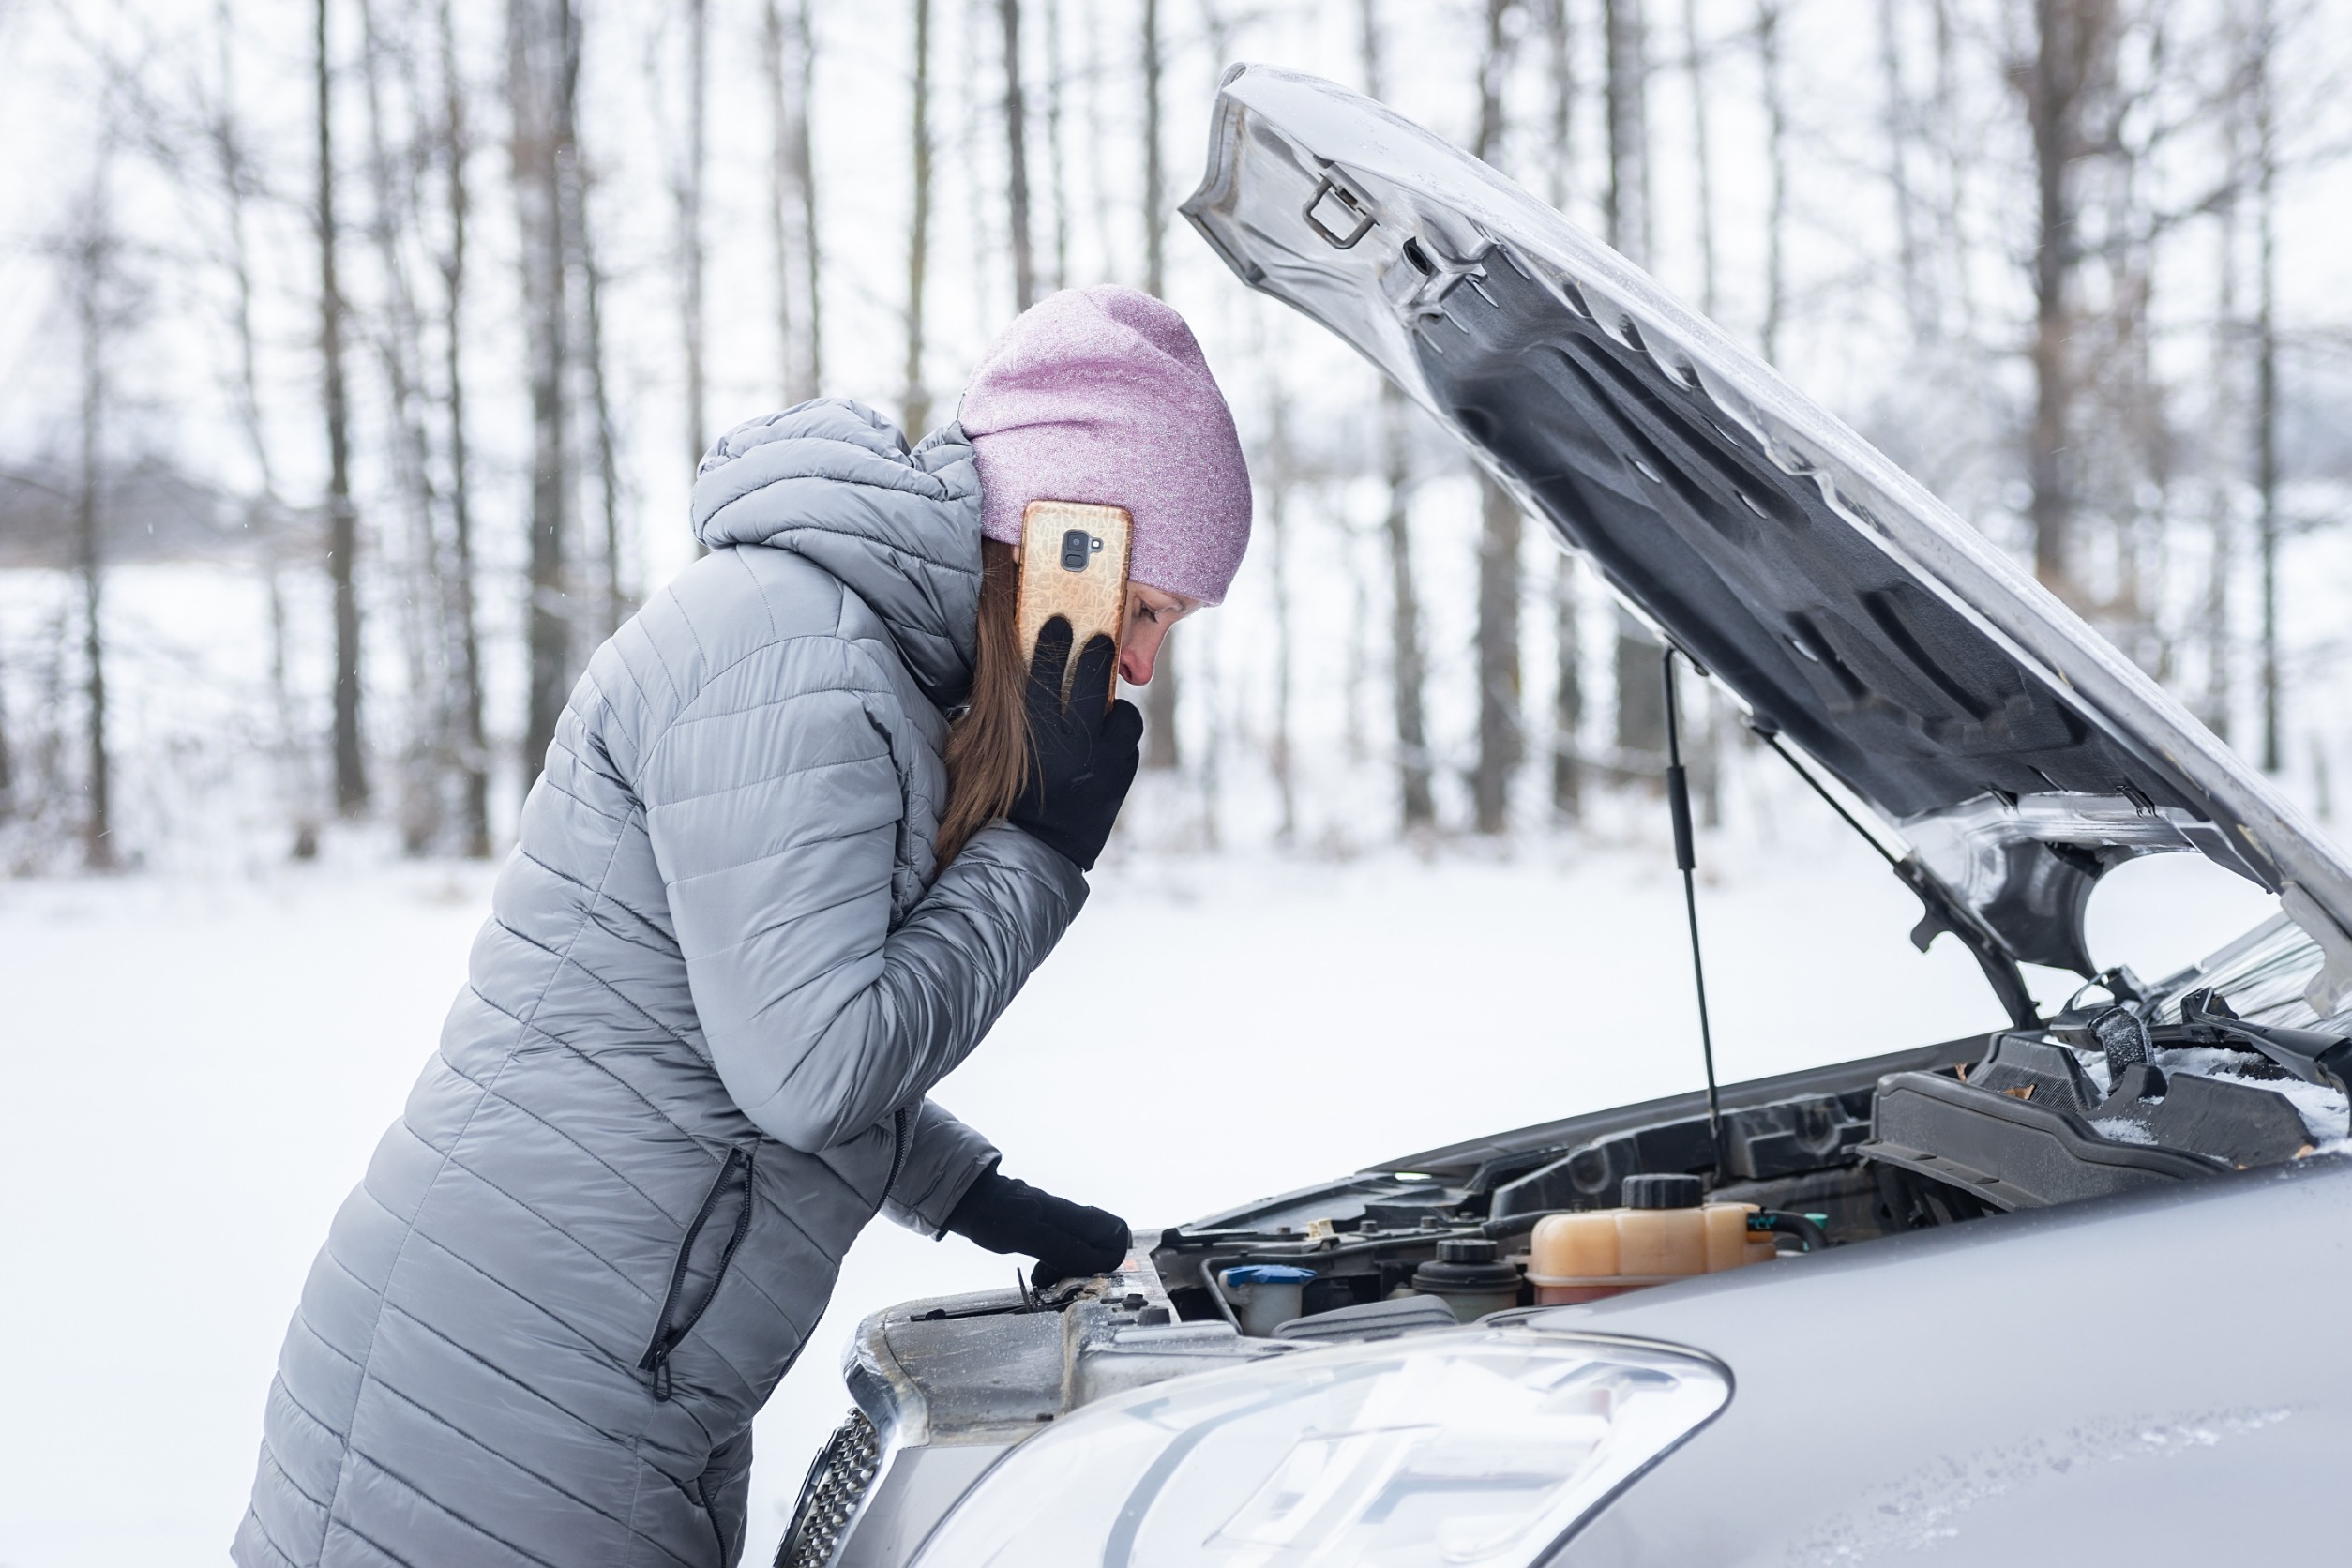 Prepare Your Car For Winter With These 4 Safety Tips - Injury Law